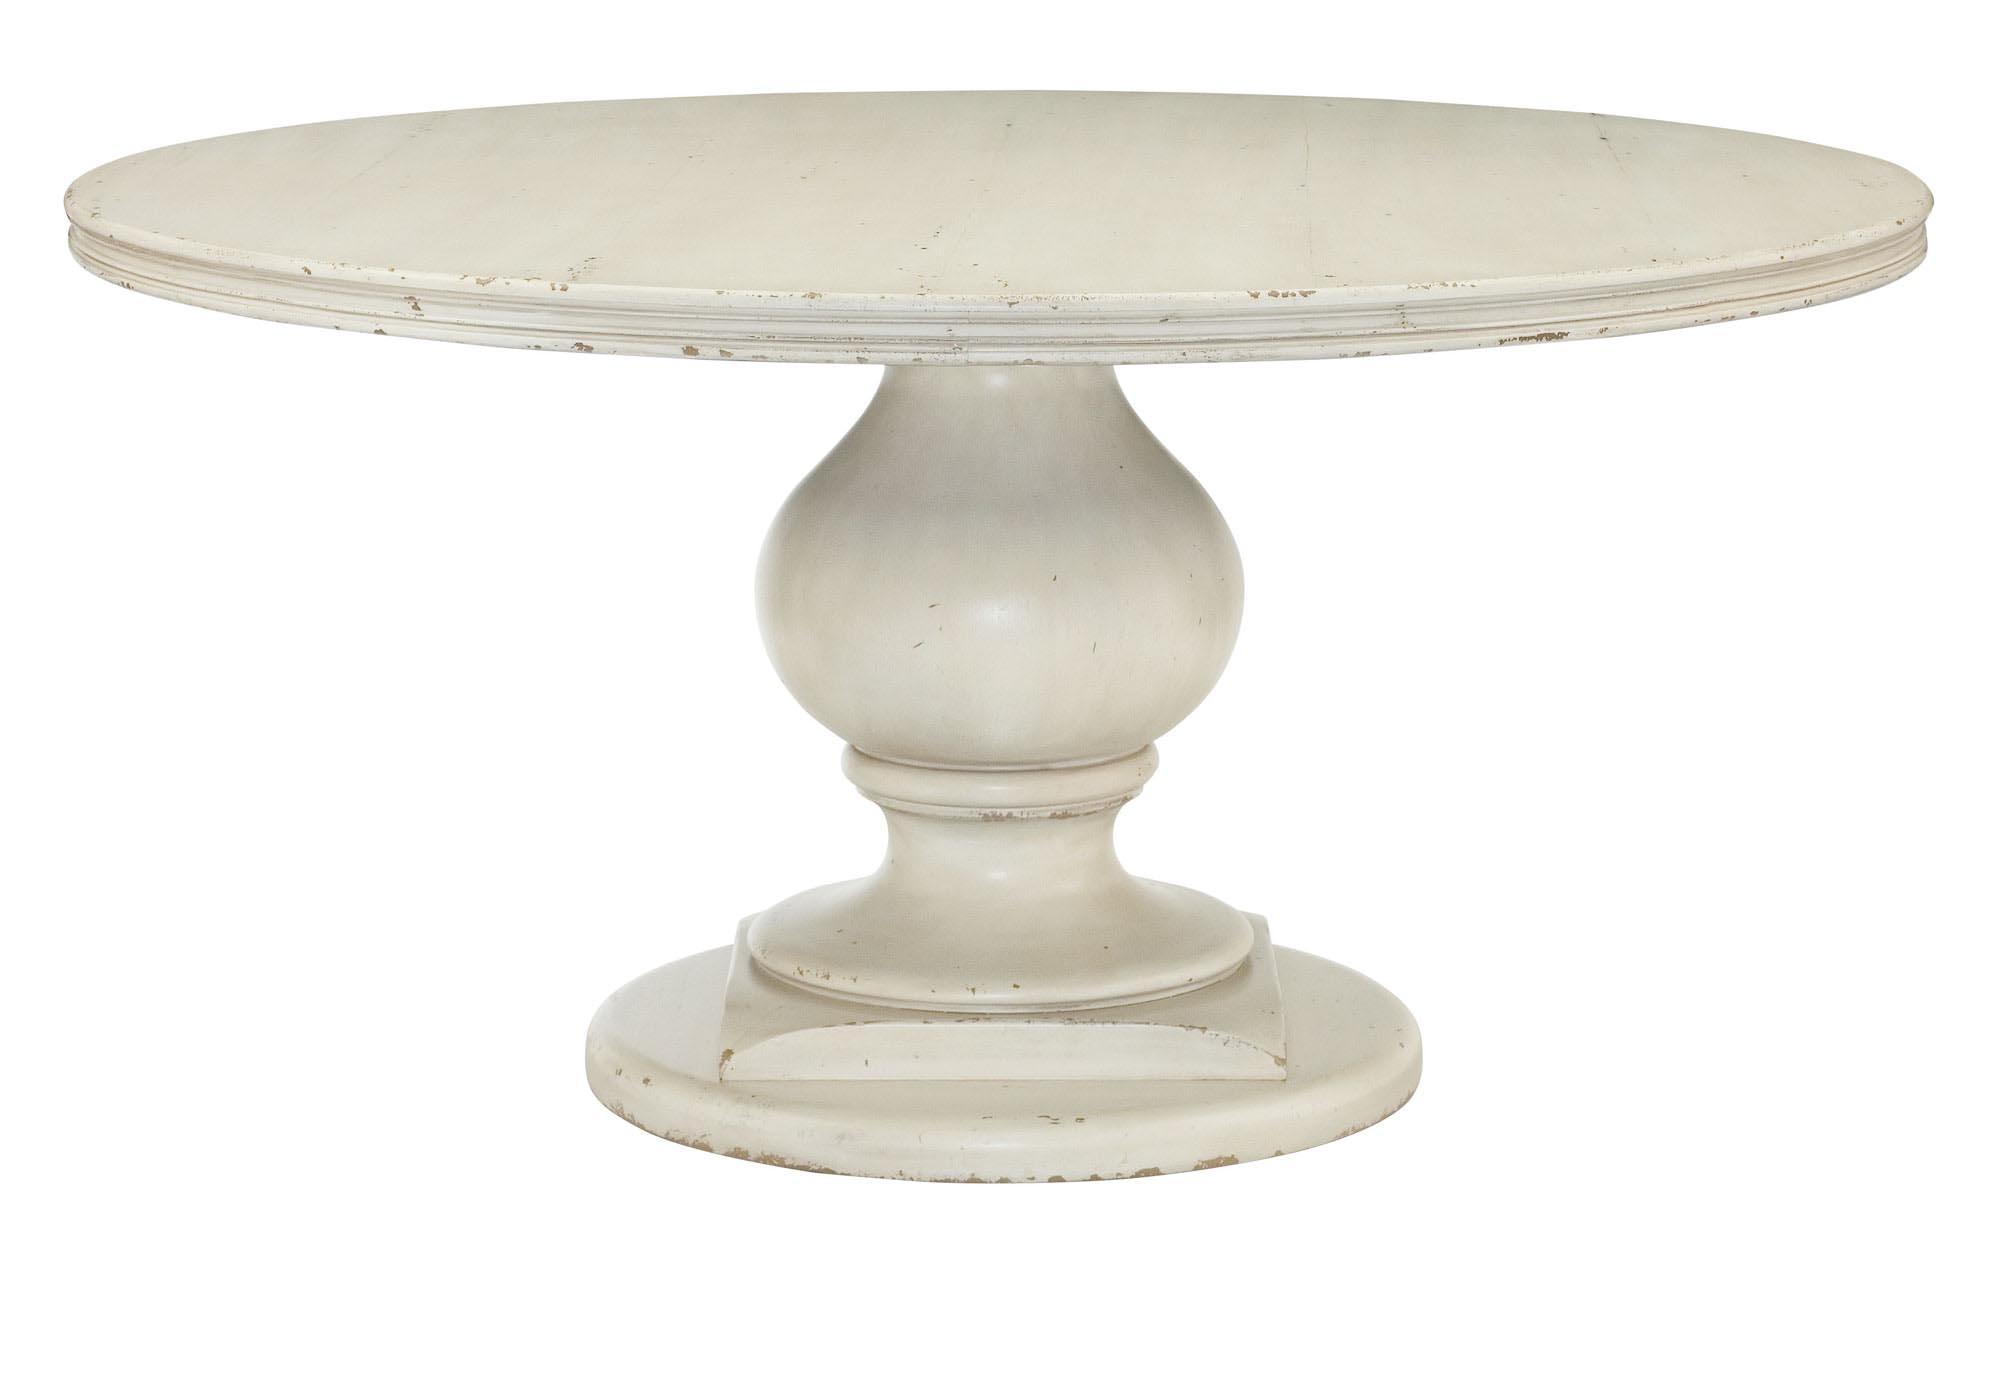 Round white pedestal dining table